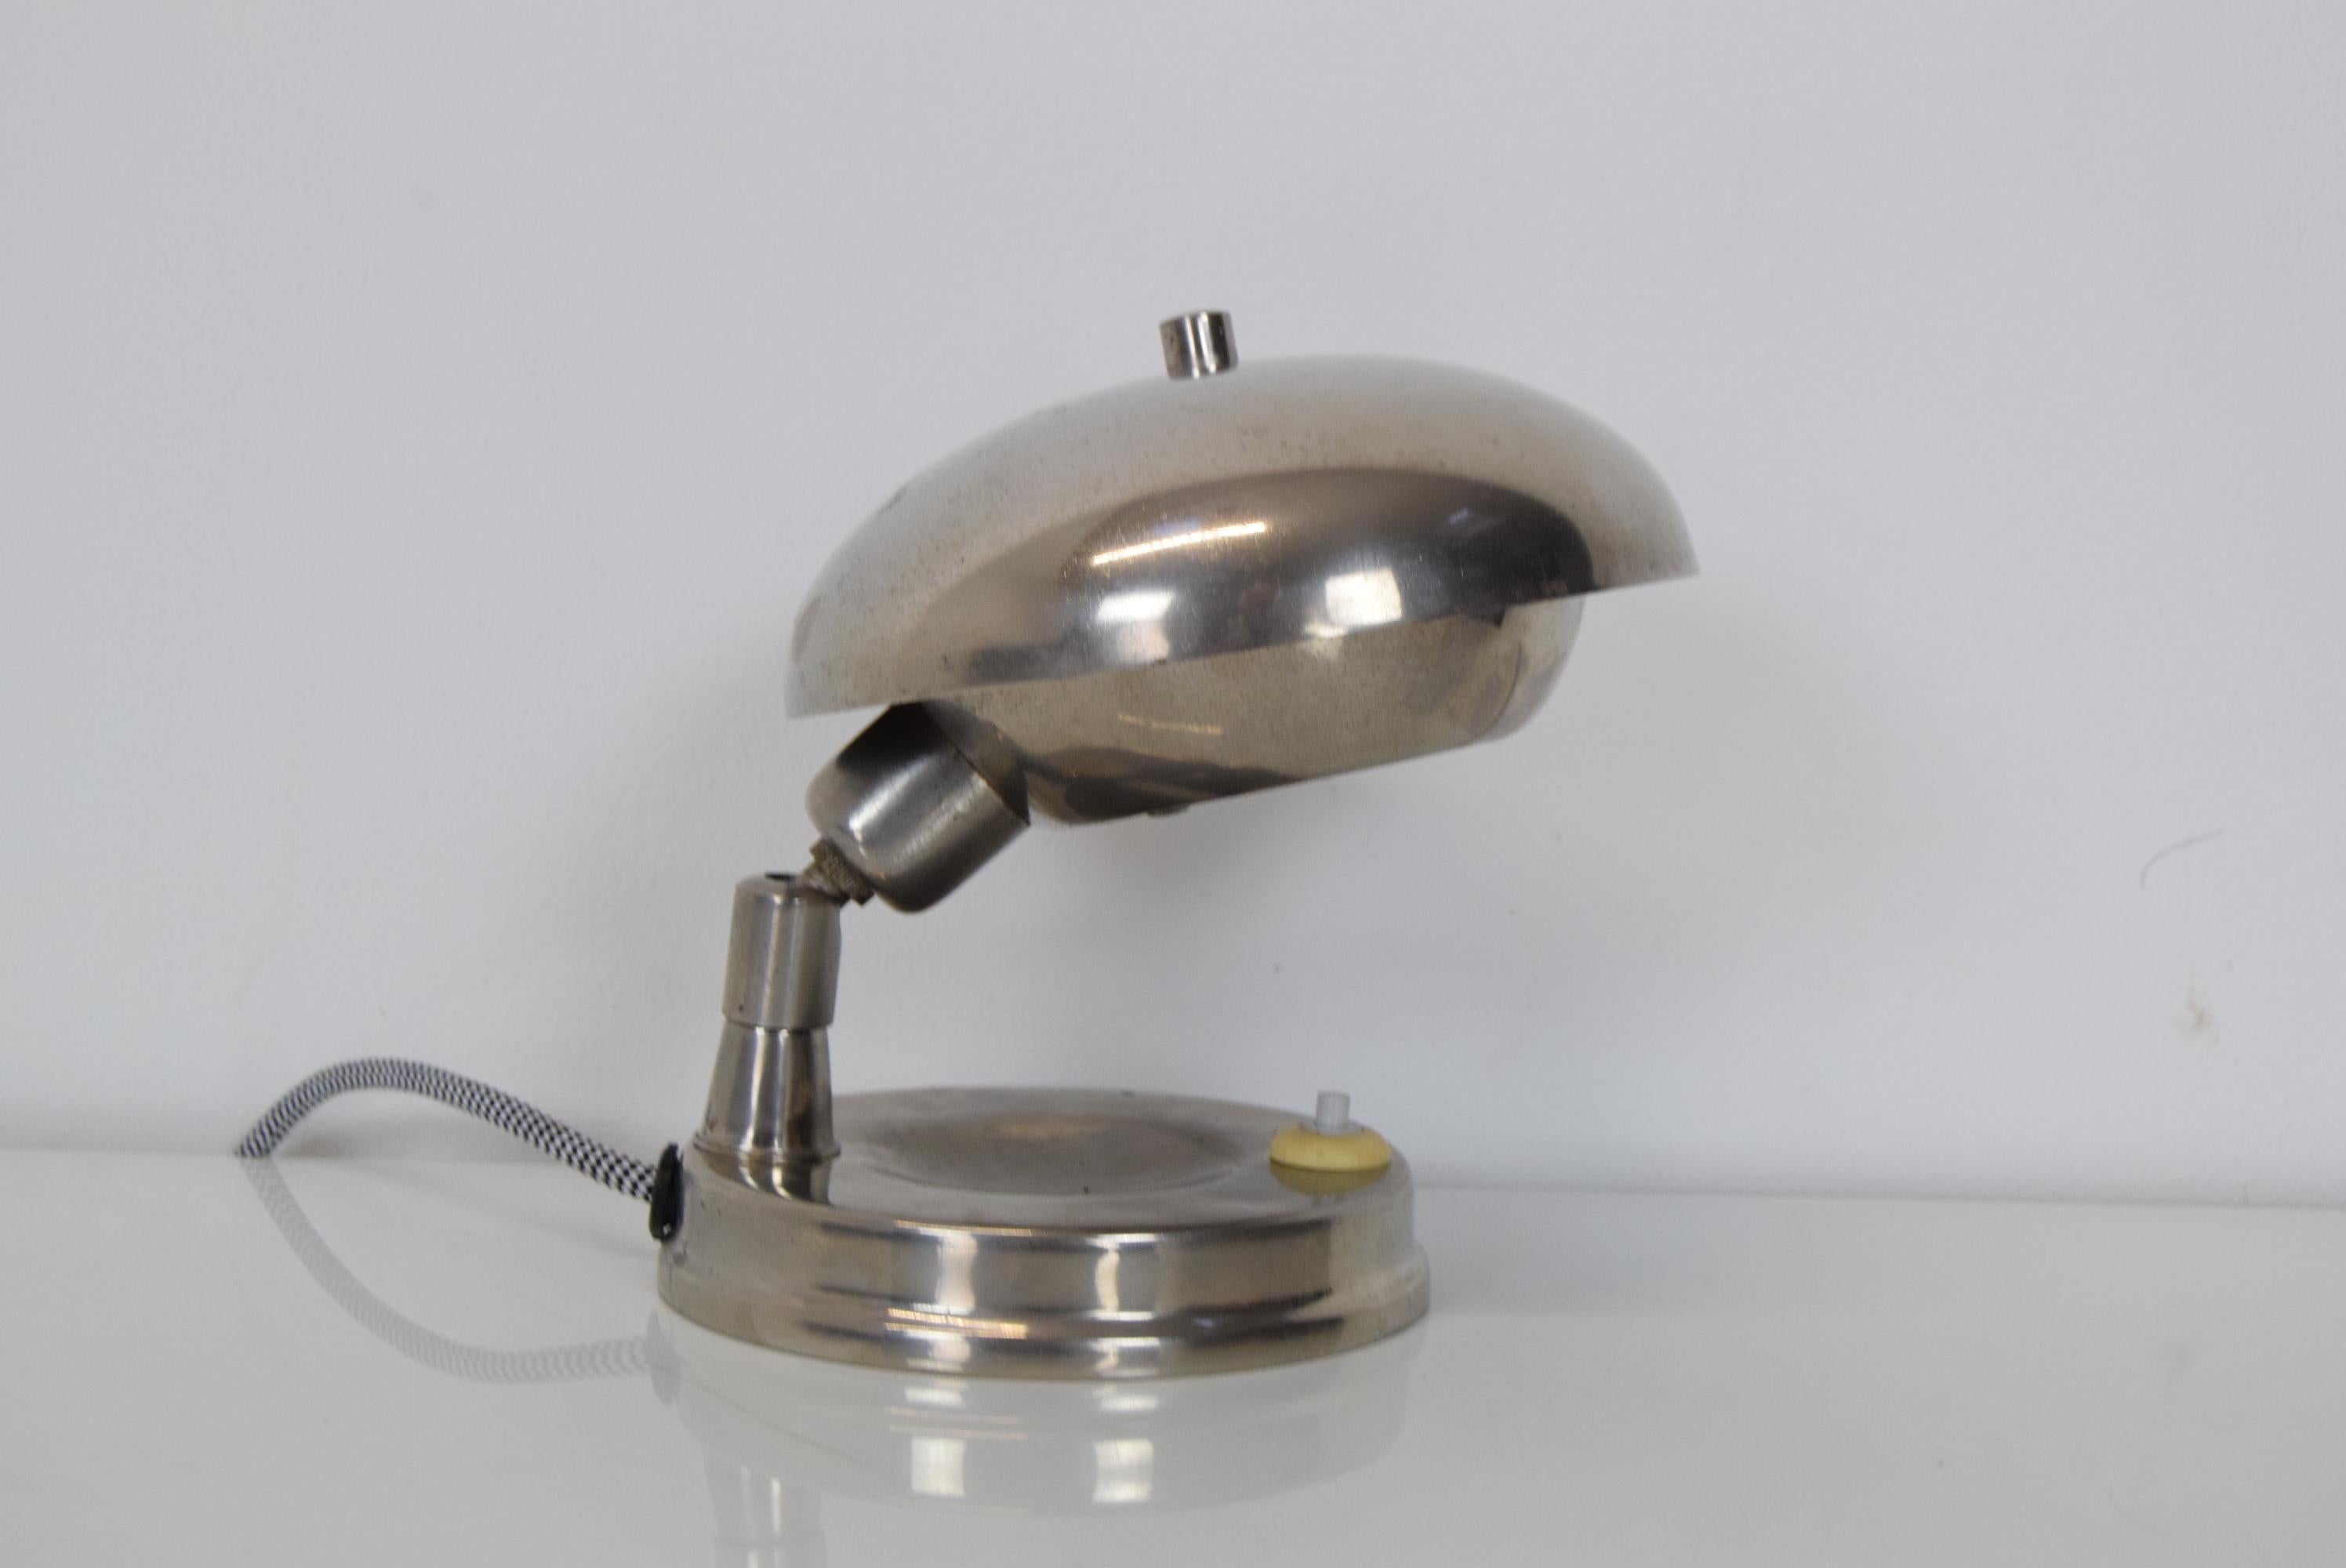 Art Deco Table Lamp, 1930's In Good Condition For Sale In Praha, CZ